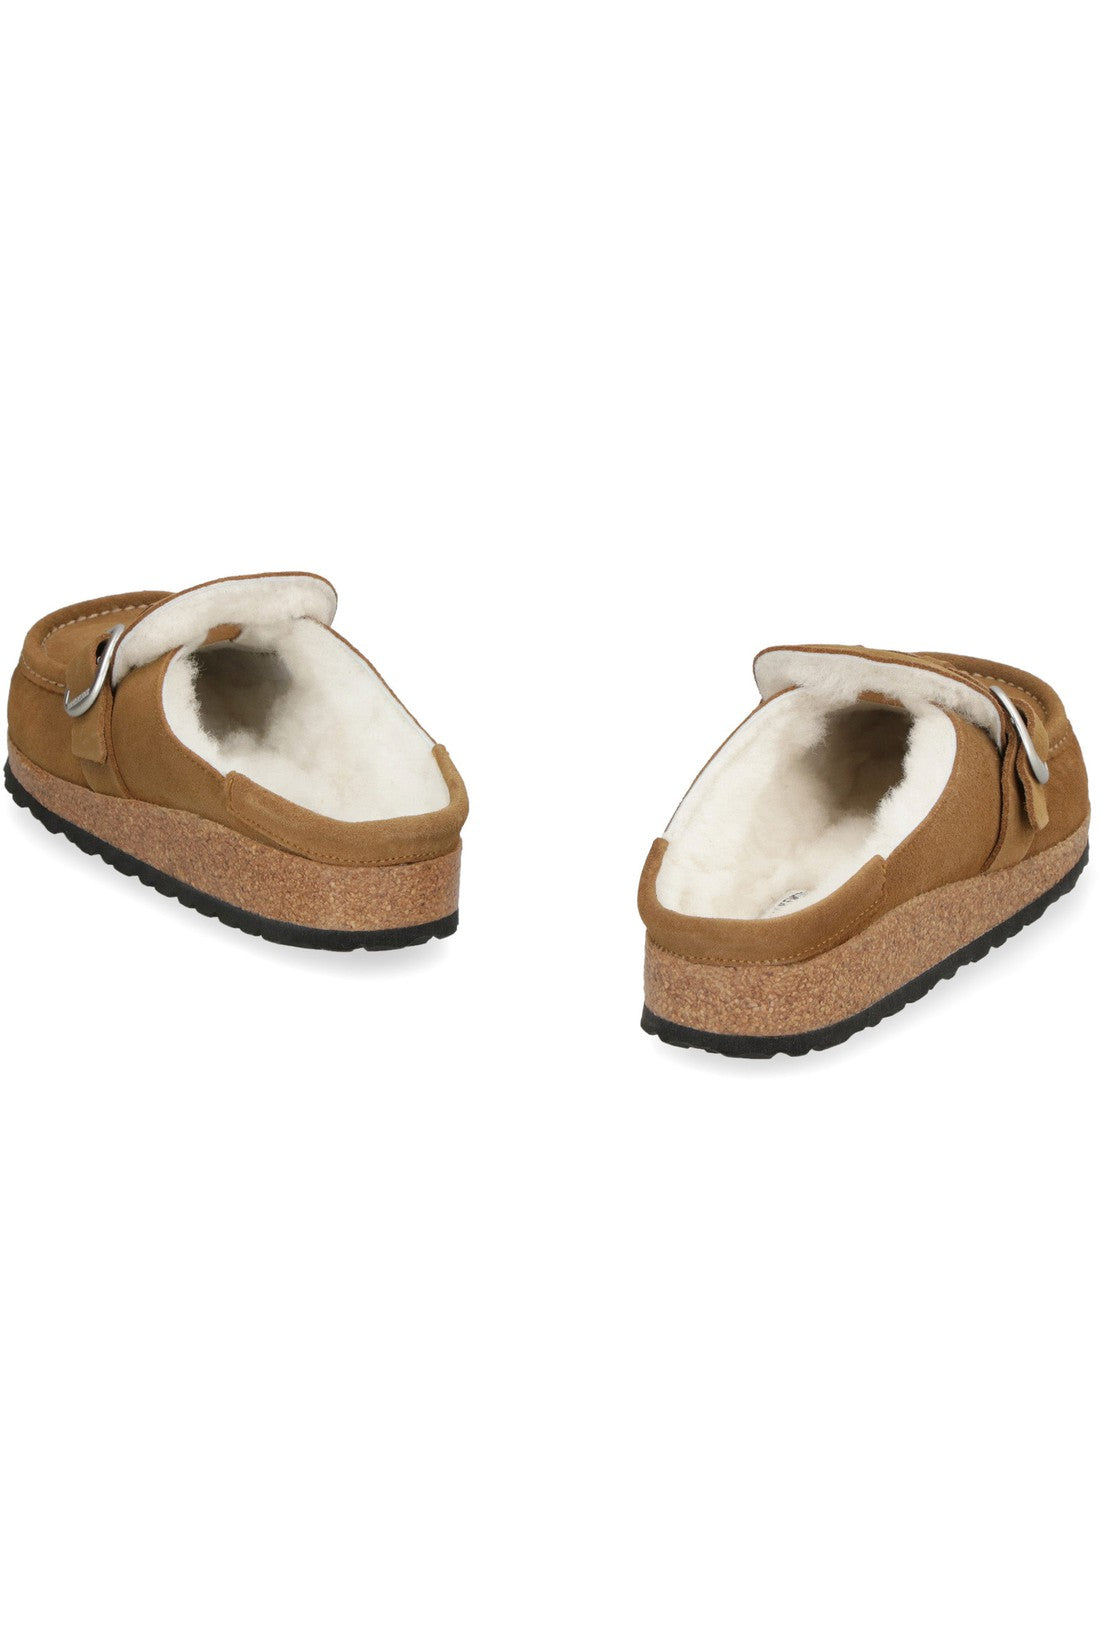 Birkenstock-OUTLET-SALE-Buckley Shearling suede and fur slippers-ARCHIVIST